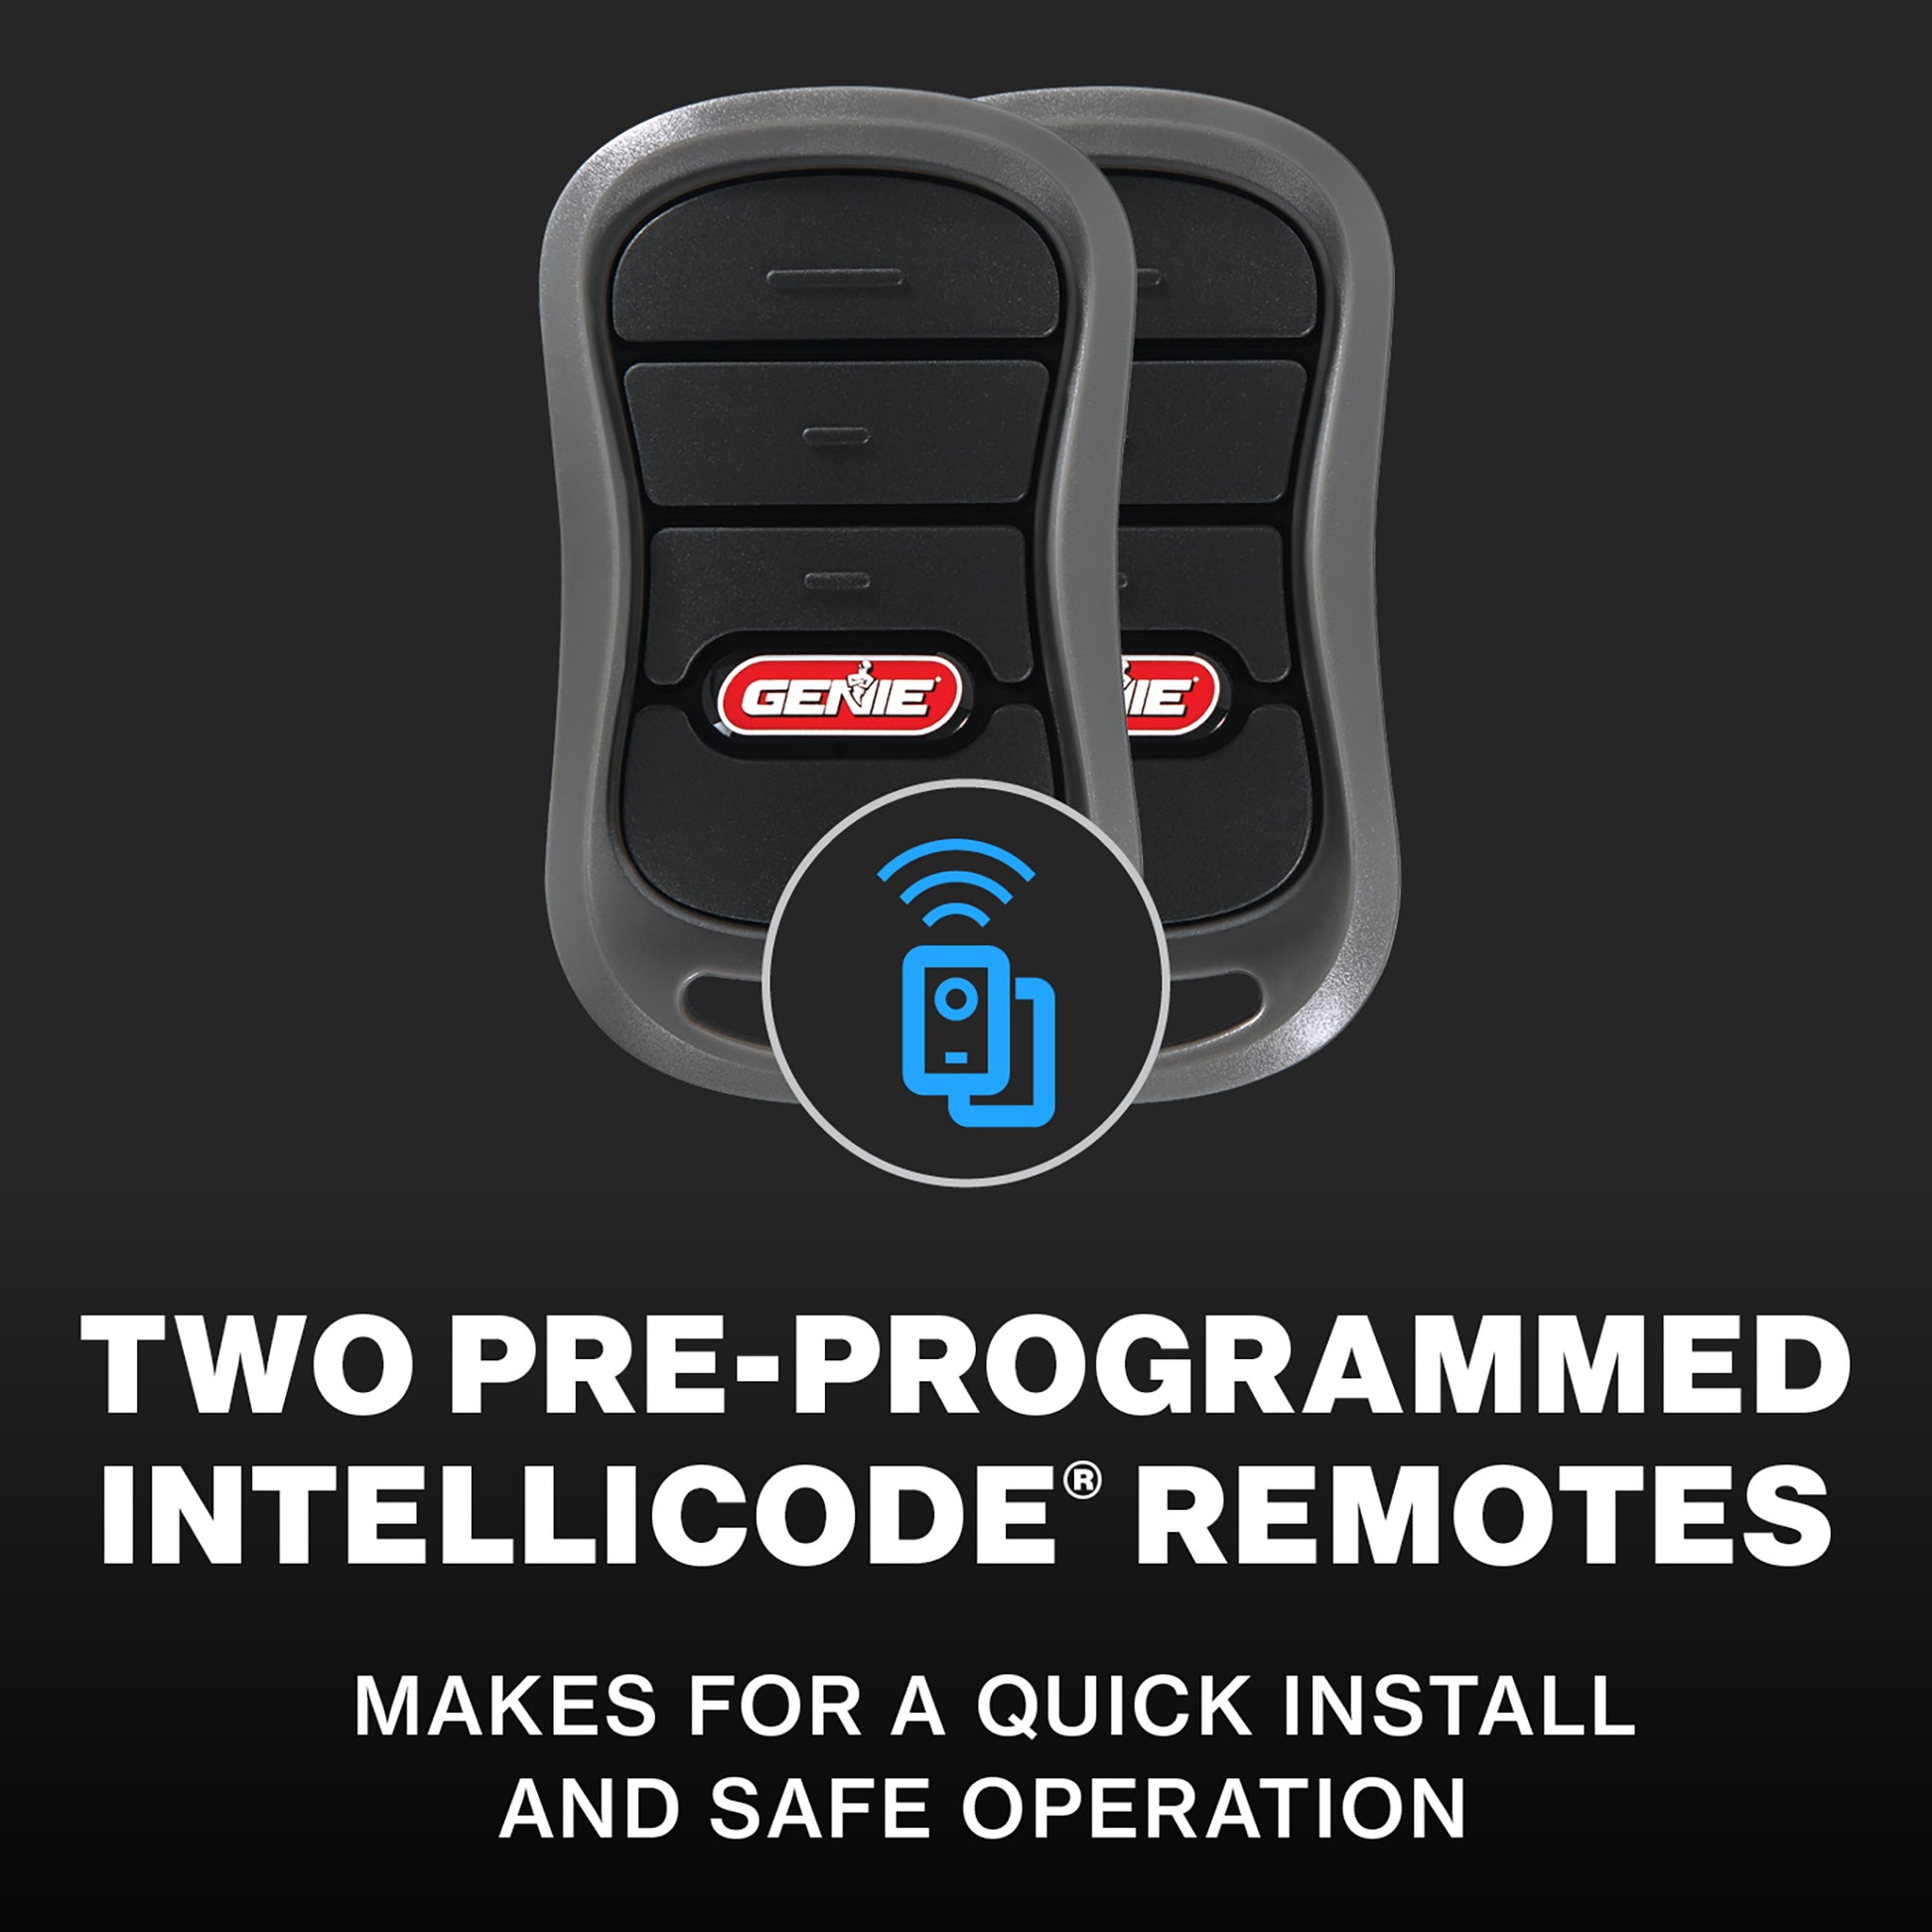 Two preprogrammed remotes makes for a quick garage door opener installation on the Genie screwdrive